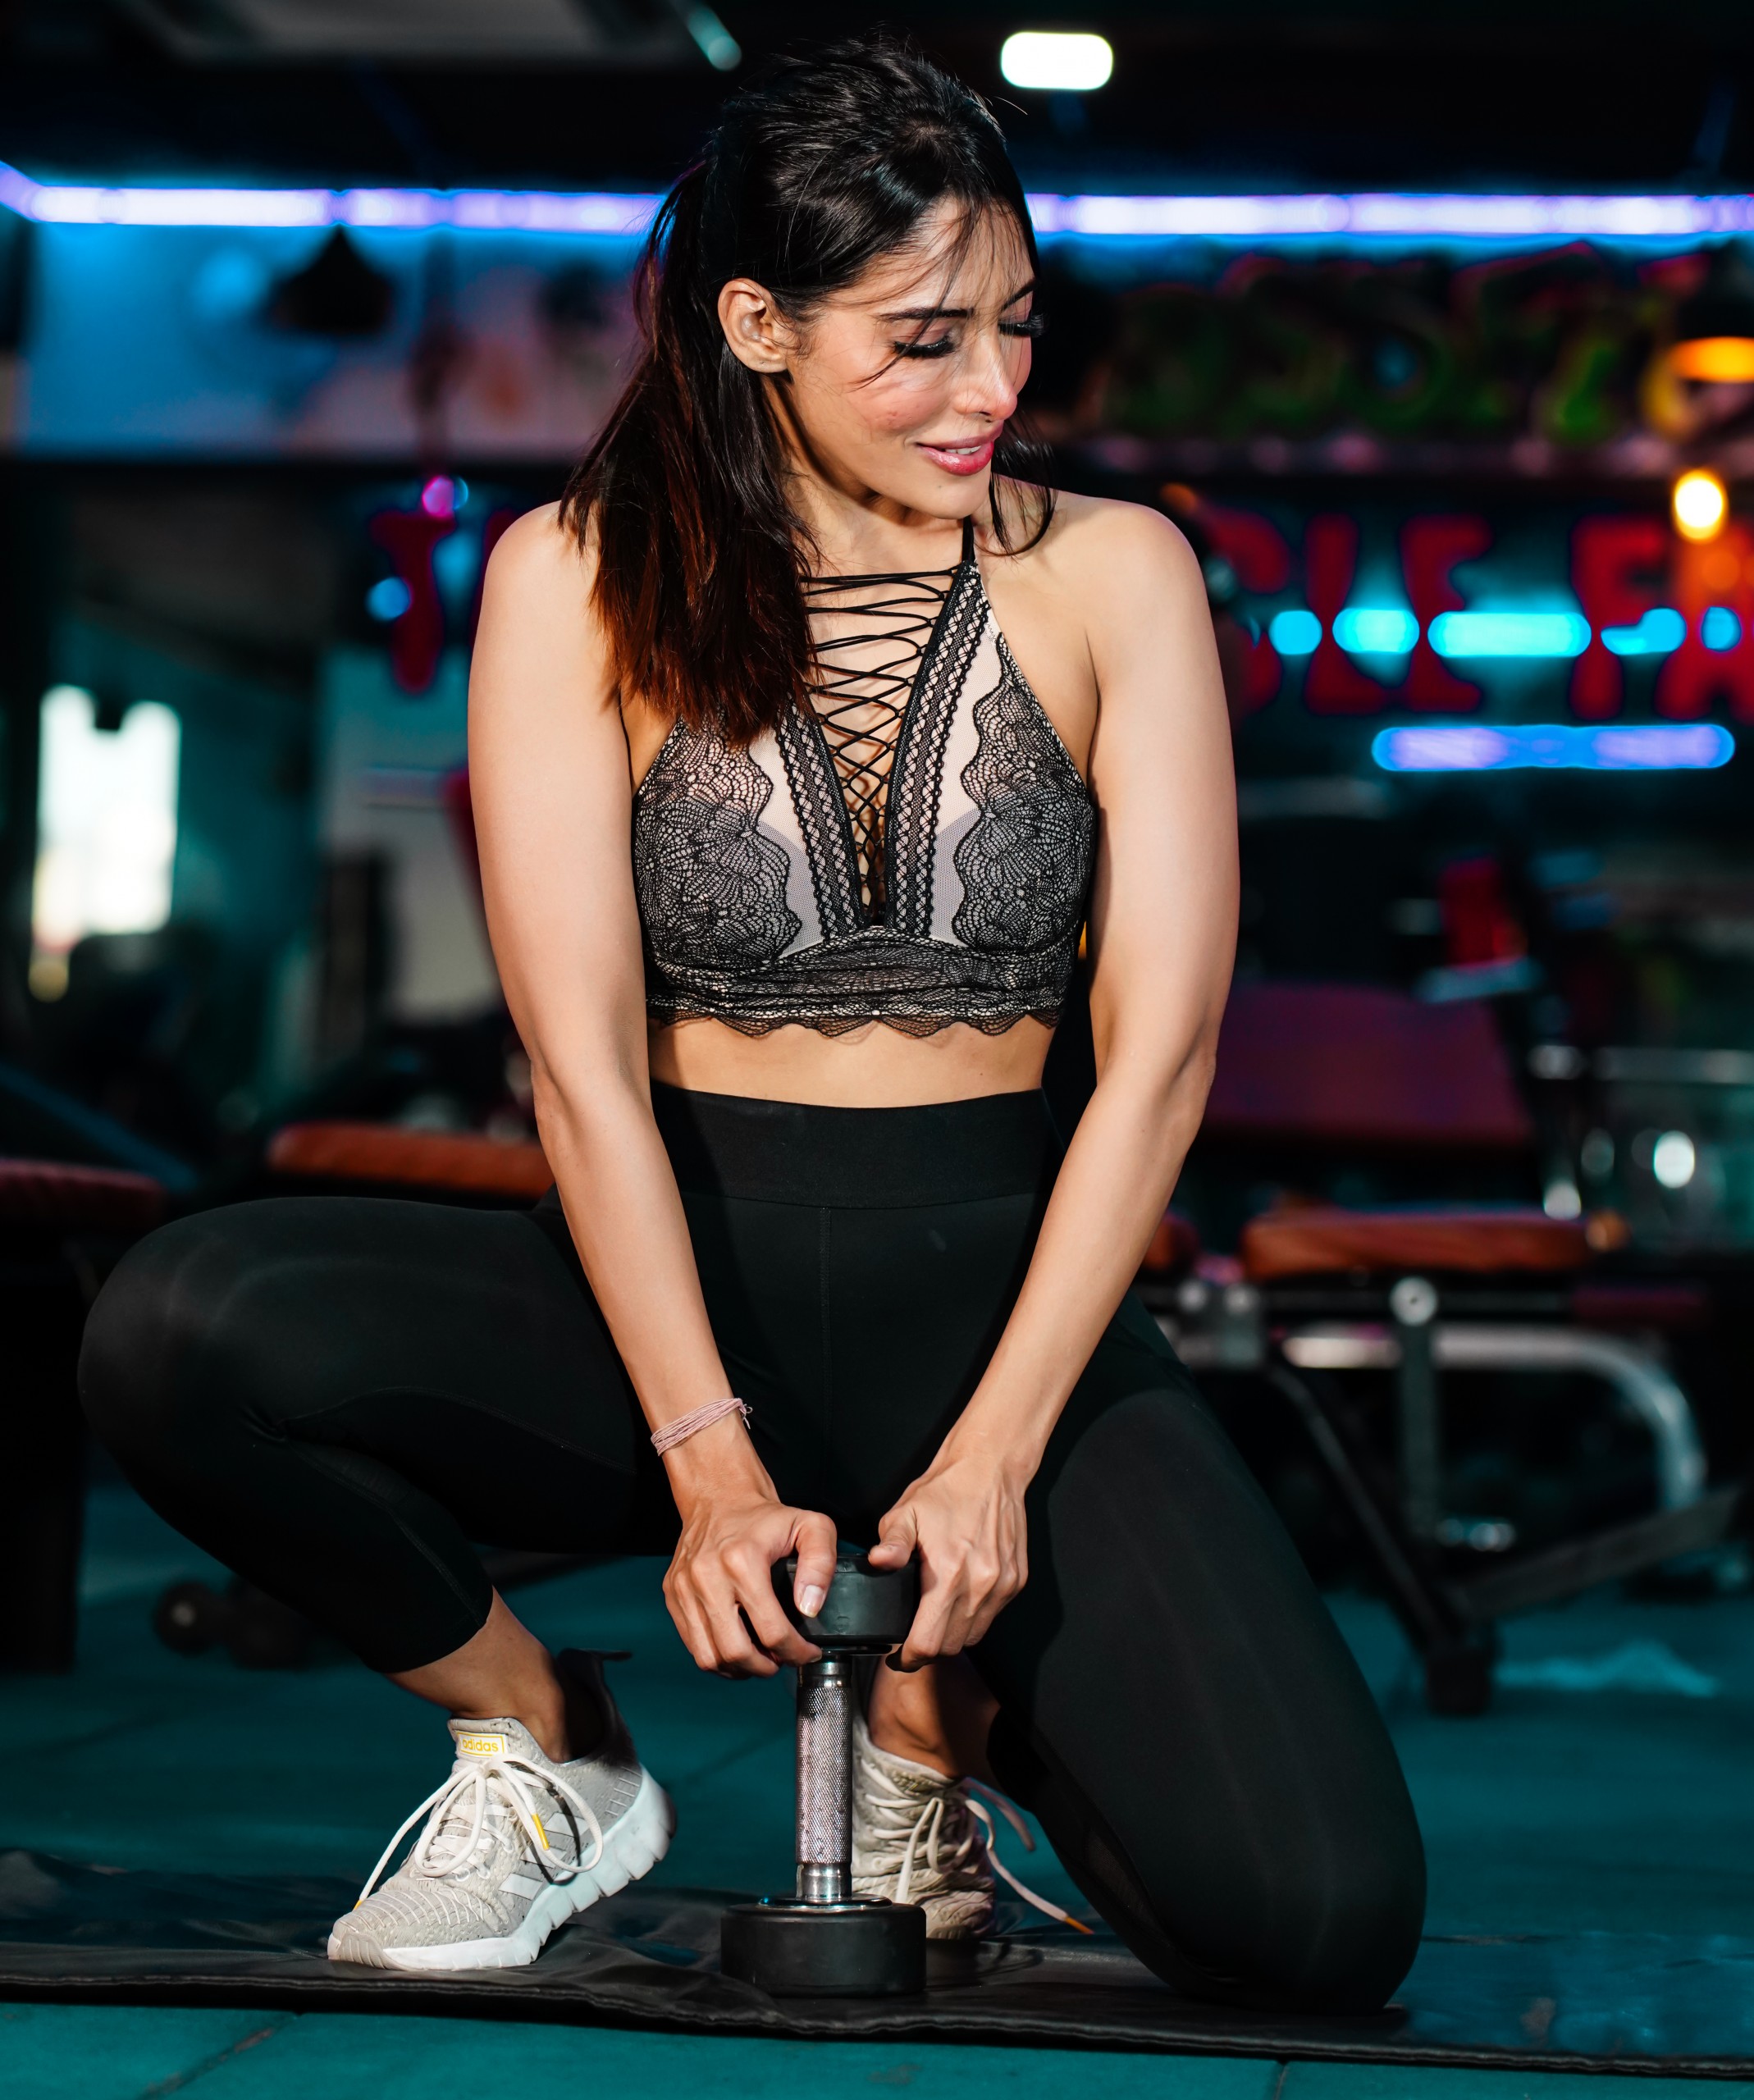 A fit girl with dumbbells